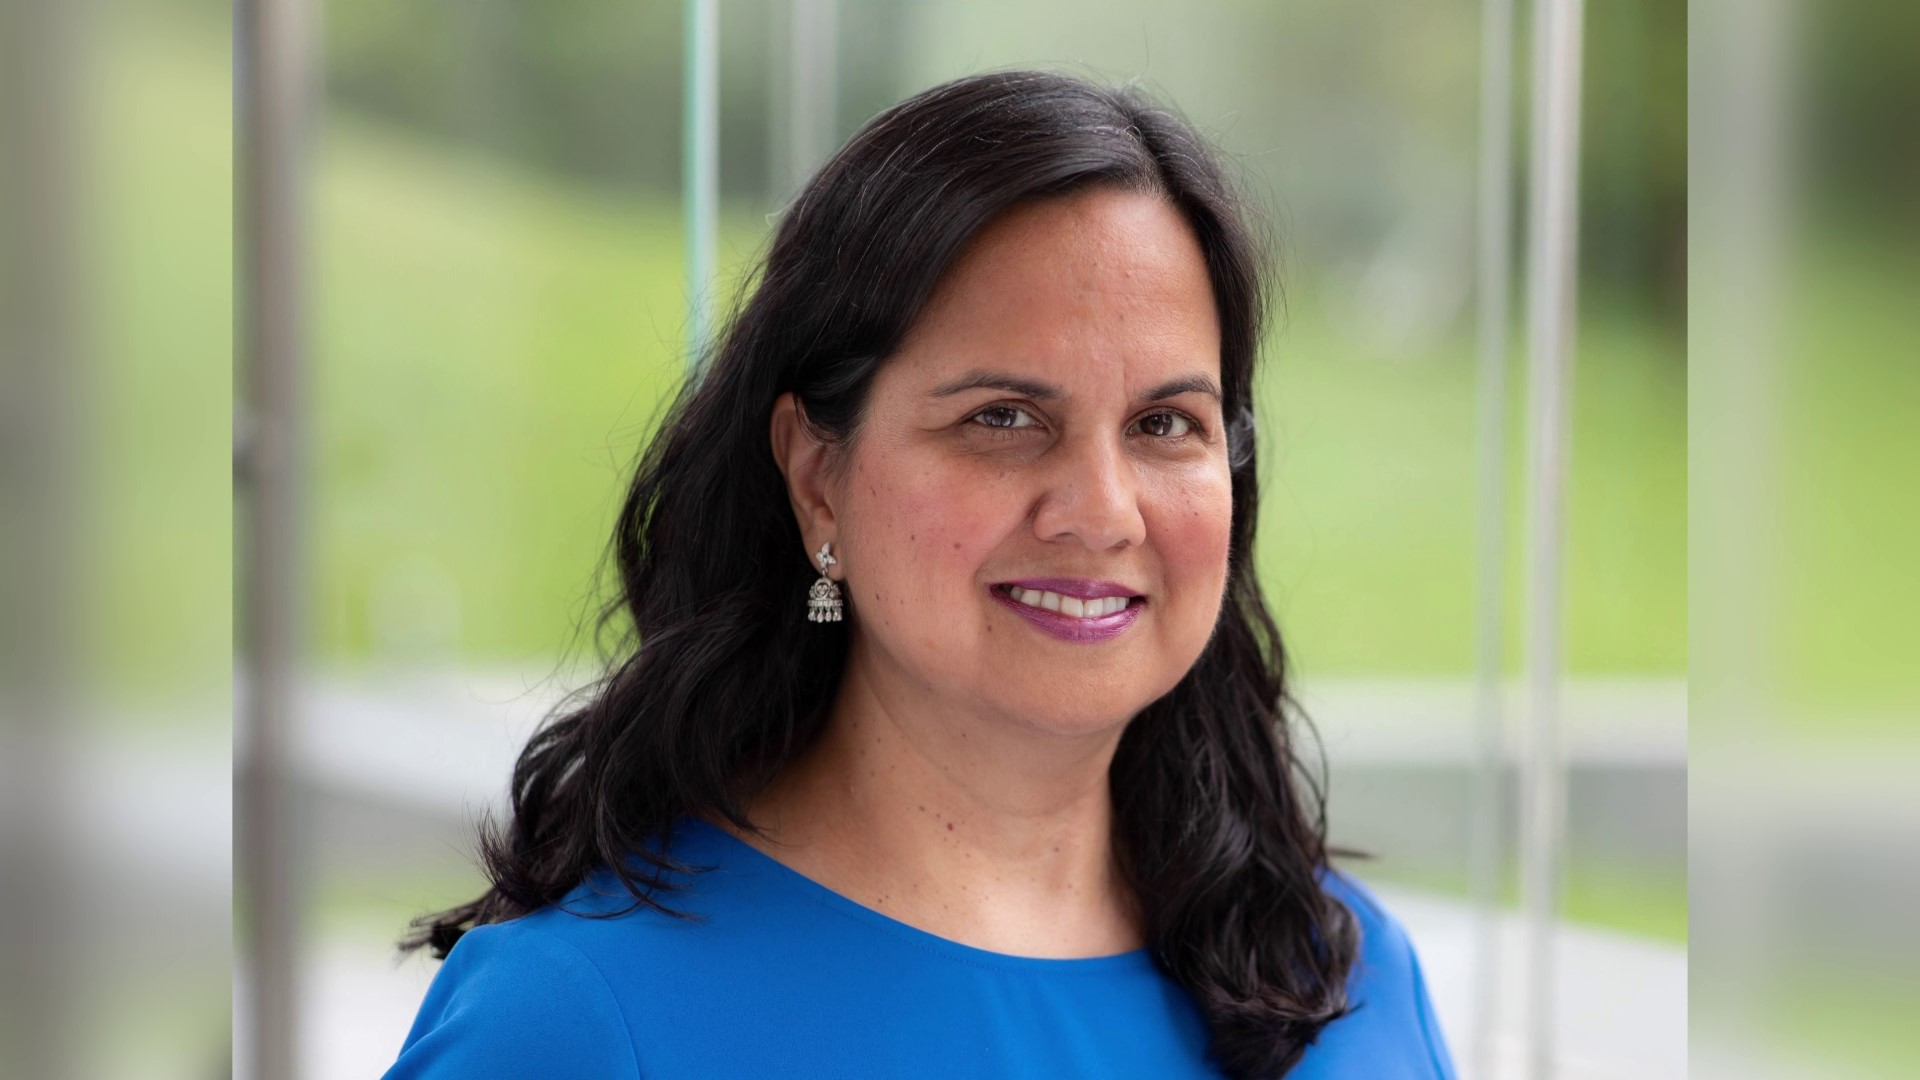 President of Health Care Transformation Walter Harris says Dr. Sharmila Makhija has a career that spans across educational, clinical, and commercial settings.